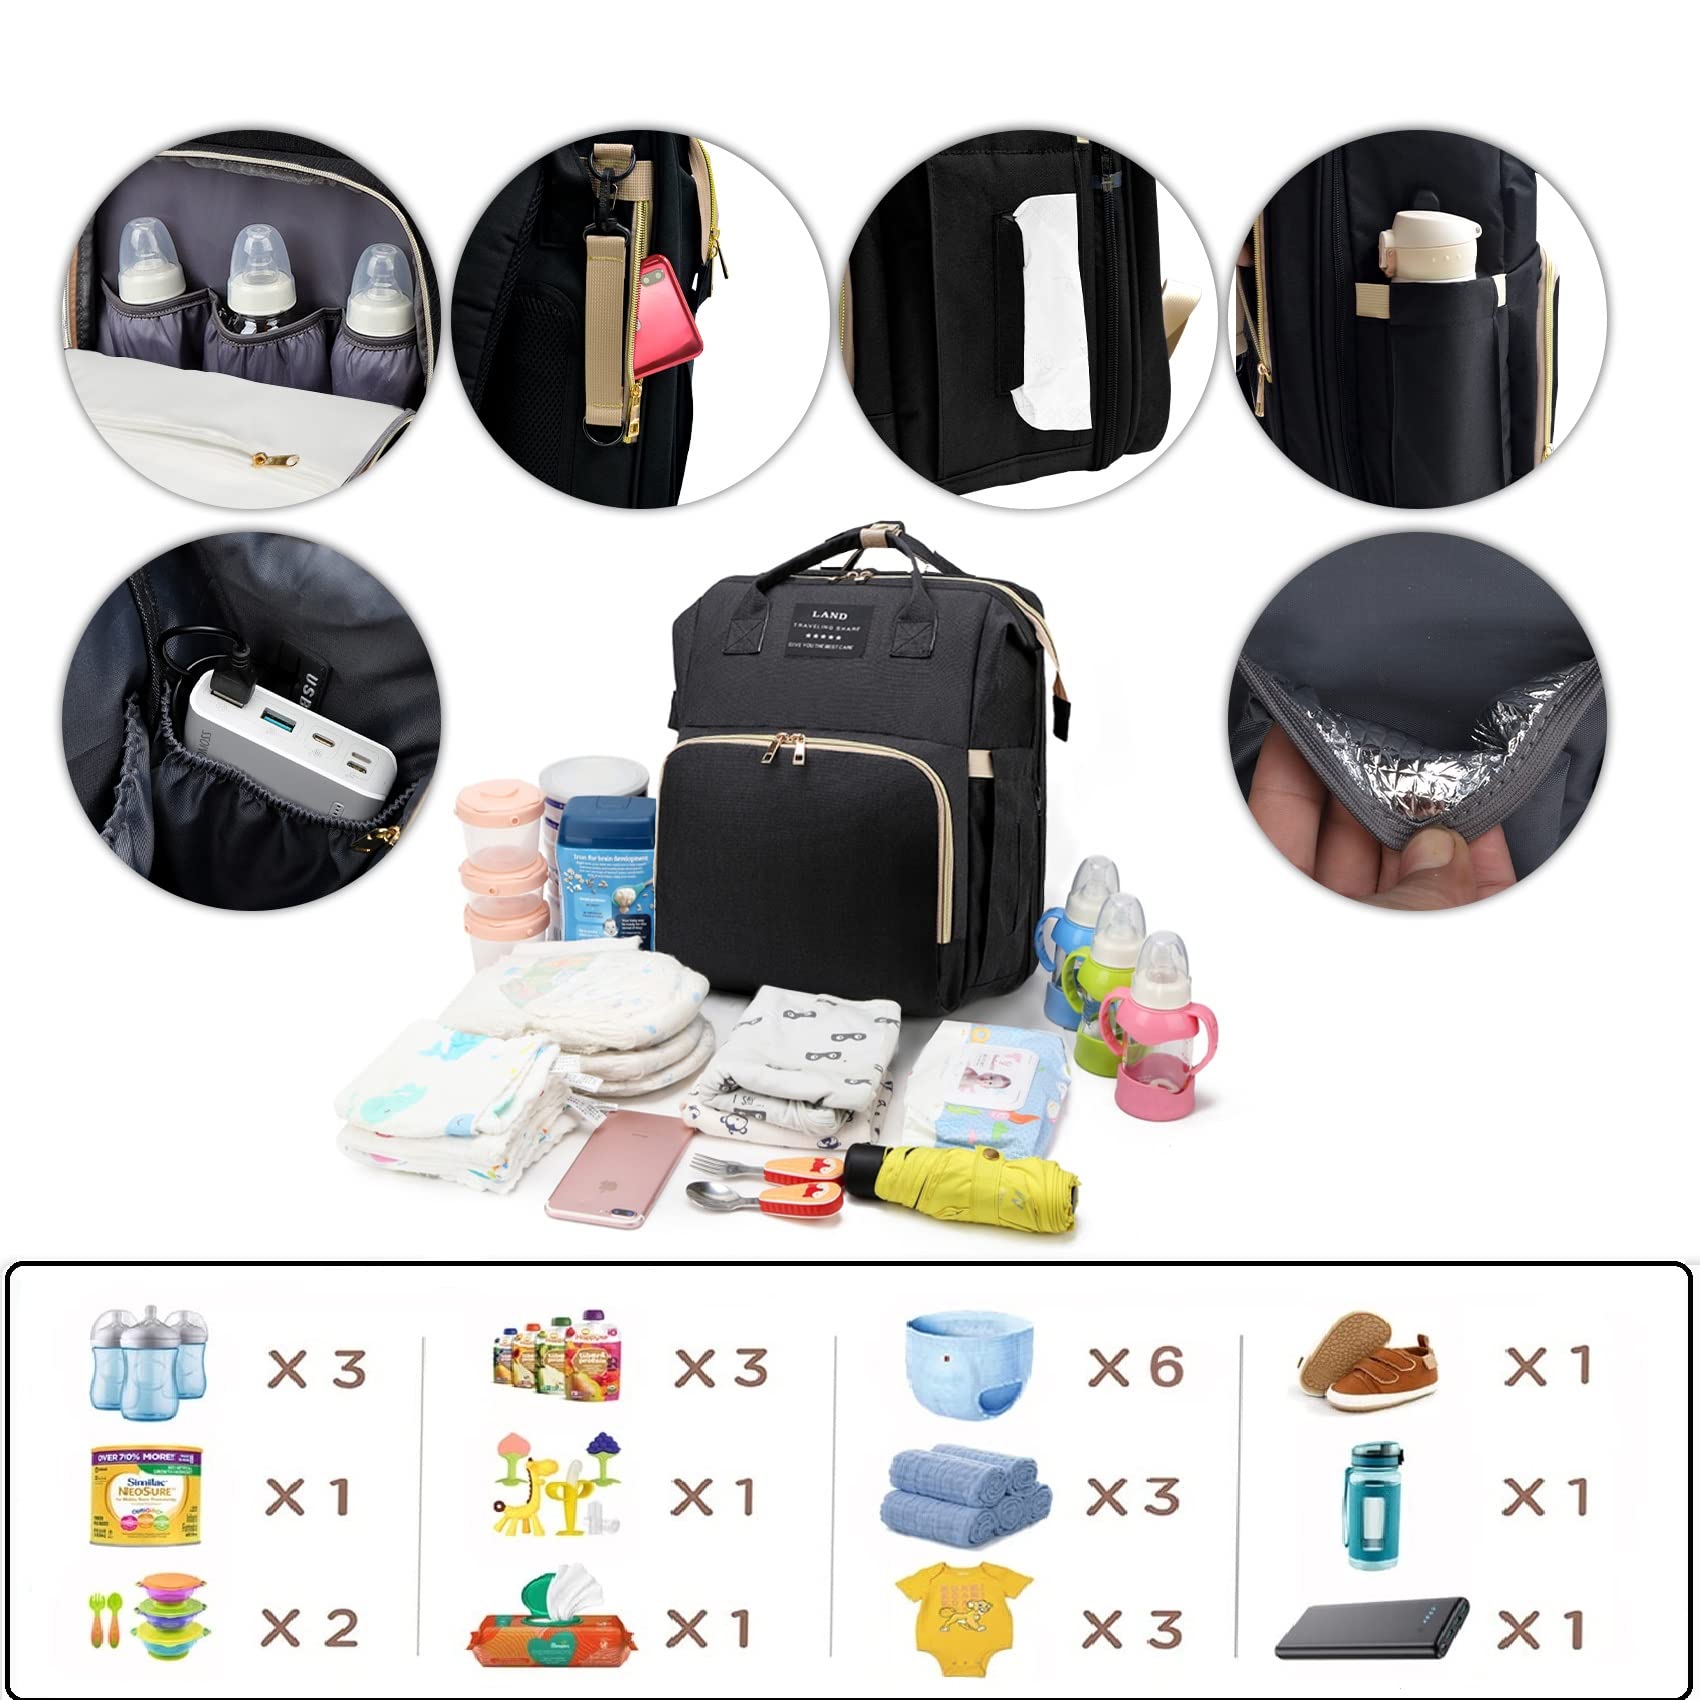 ANWTOTU Diaper Bag with Changing Station,Diaper Bag Backpack,7 in 1 Travel Diaper Bag,Mommy Bag With USB Charging Port (Black)